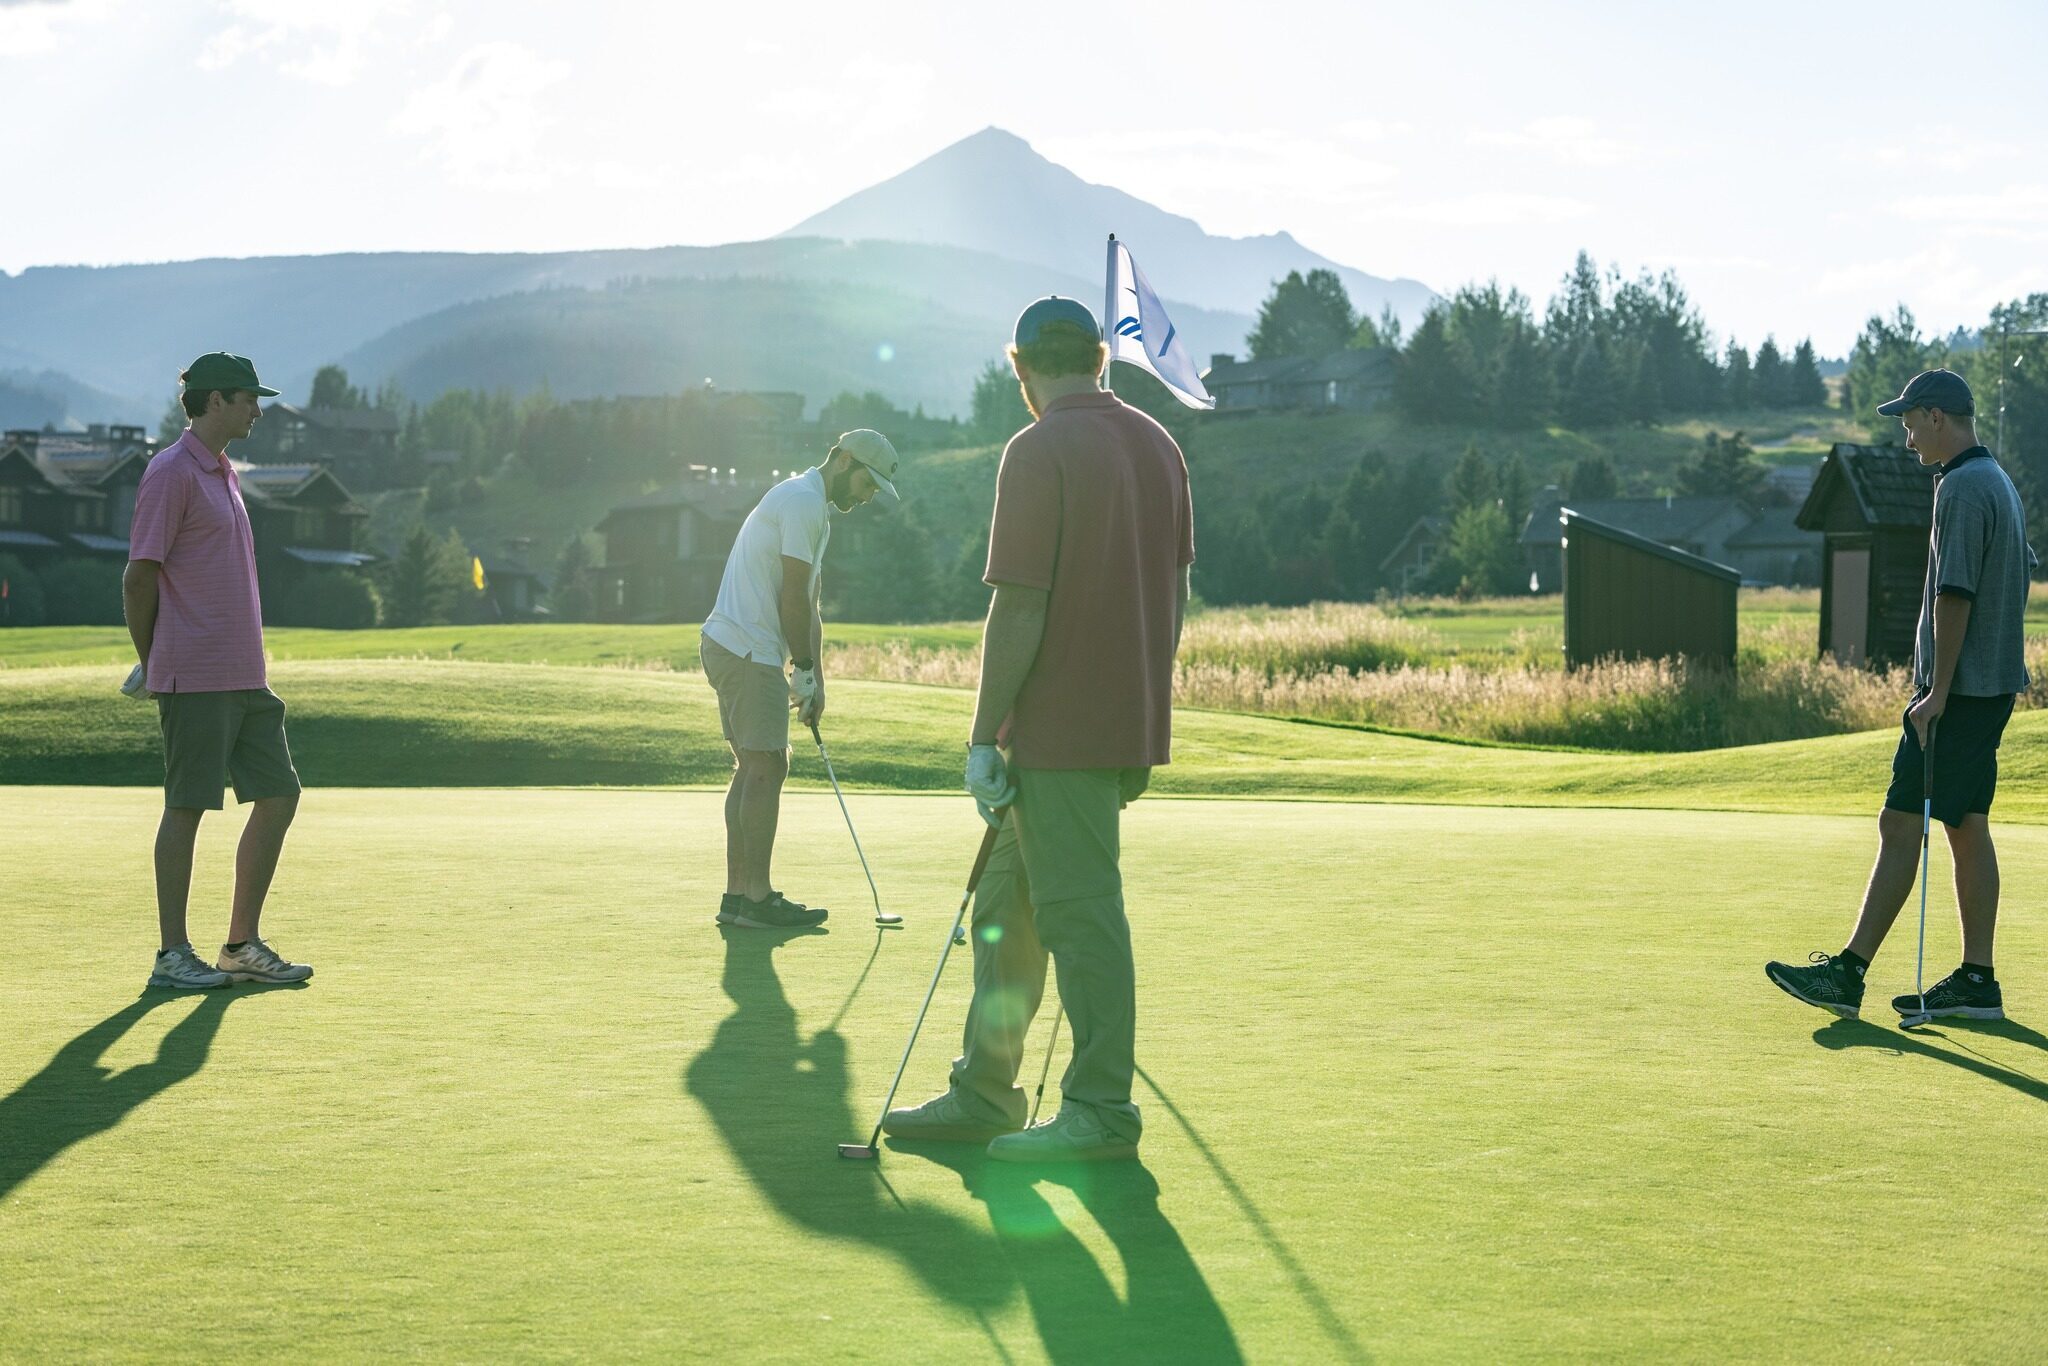 During the summer, enjoy activities such as golf!